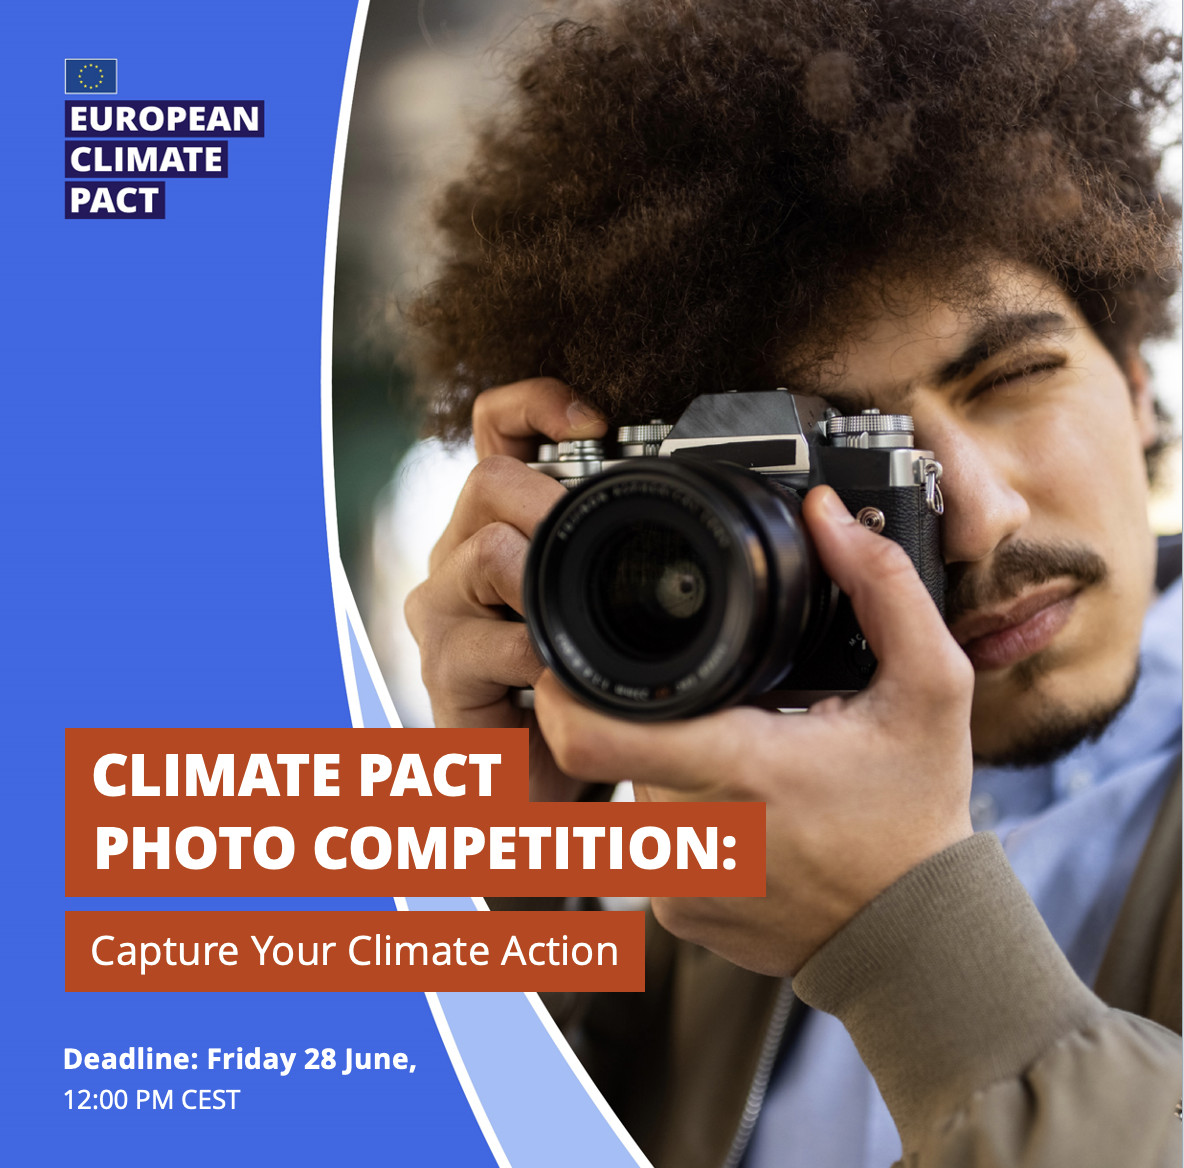 📸 Don't miss the #EUClimatePact photo competition and capture climate action in your city! Show us how you're making a difference with striking images, inspire others, and have the chance to win prizes!
Deadline: 28 June: europa.eu/!J7KyH6
#MyWorldOurPlanet